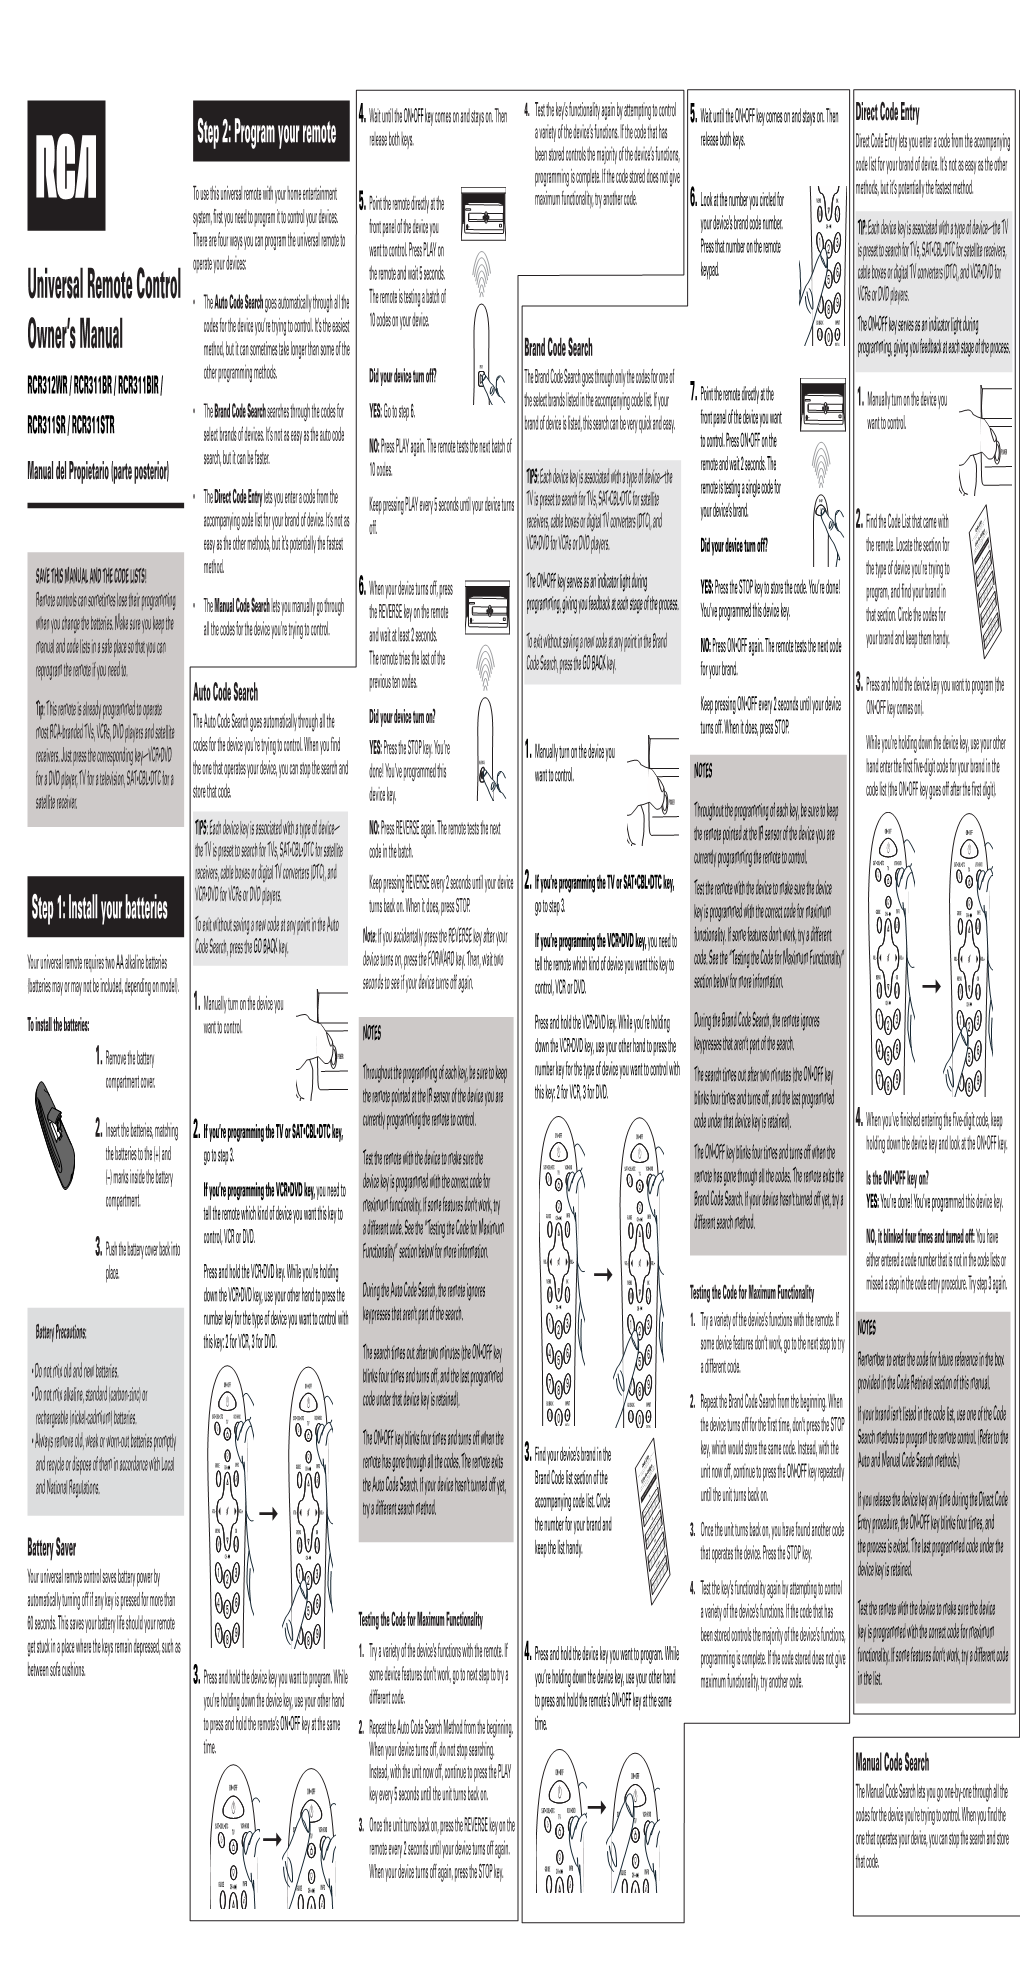 Universal Remote Control Owner's Manual